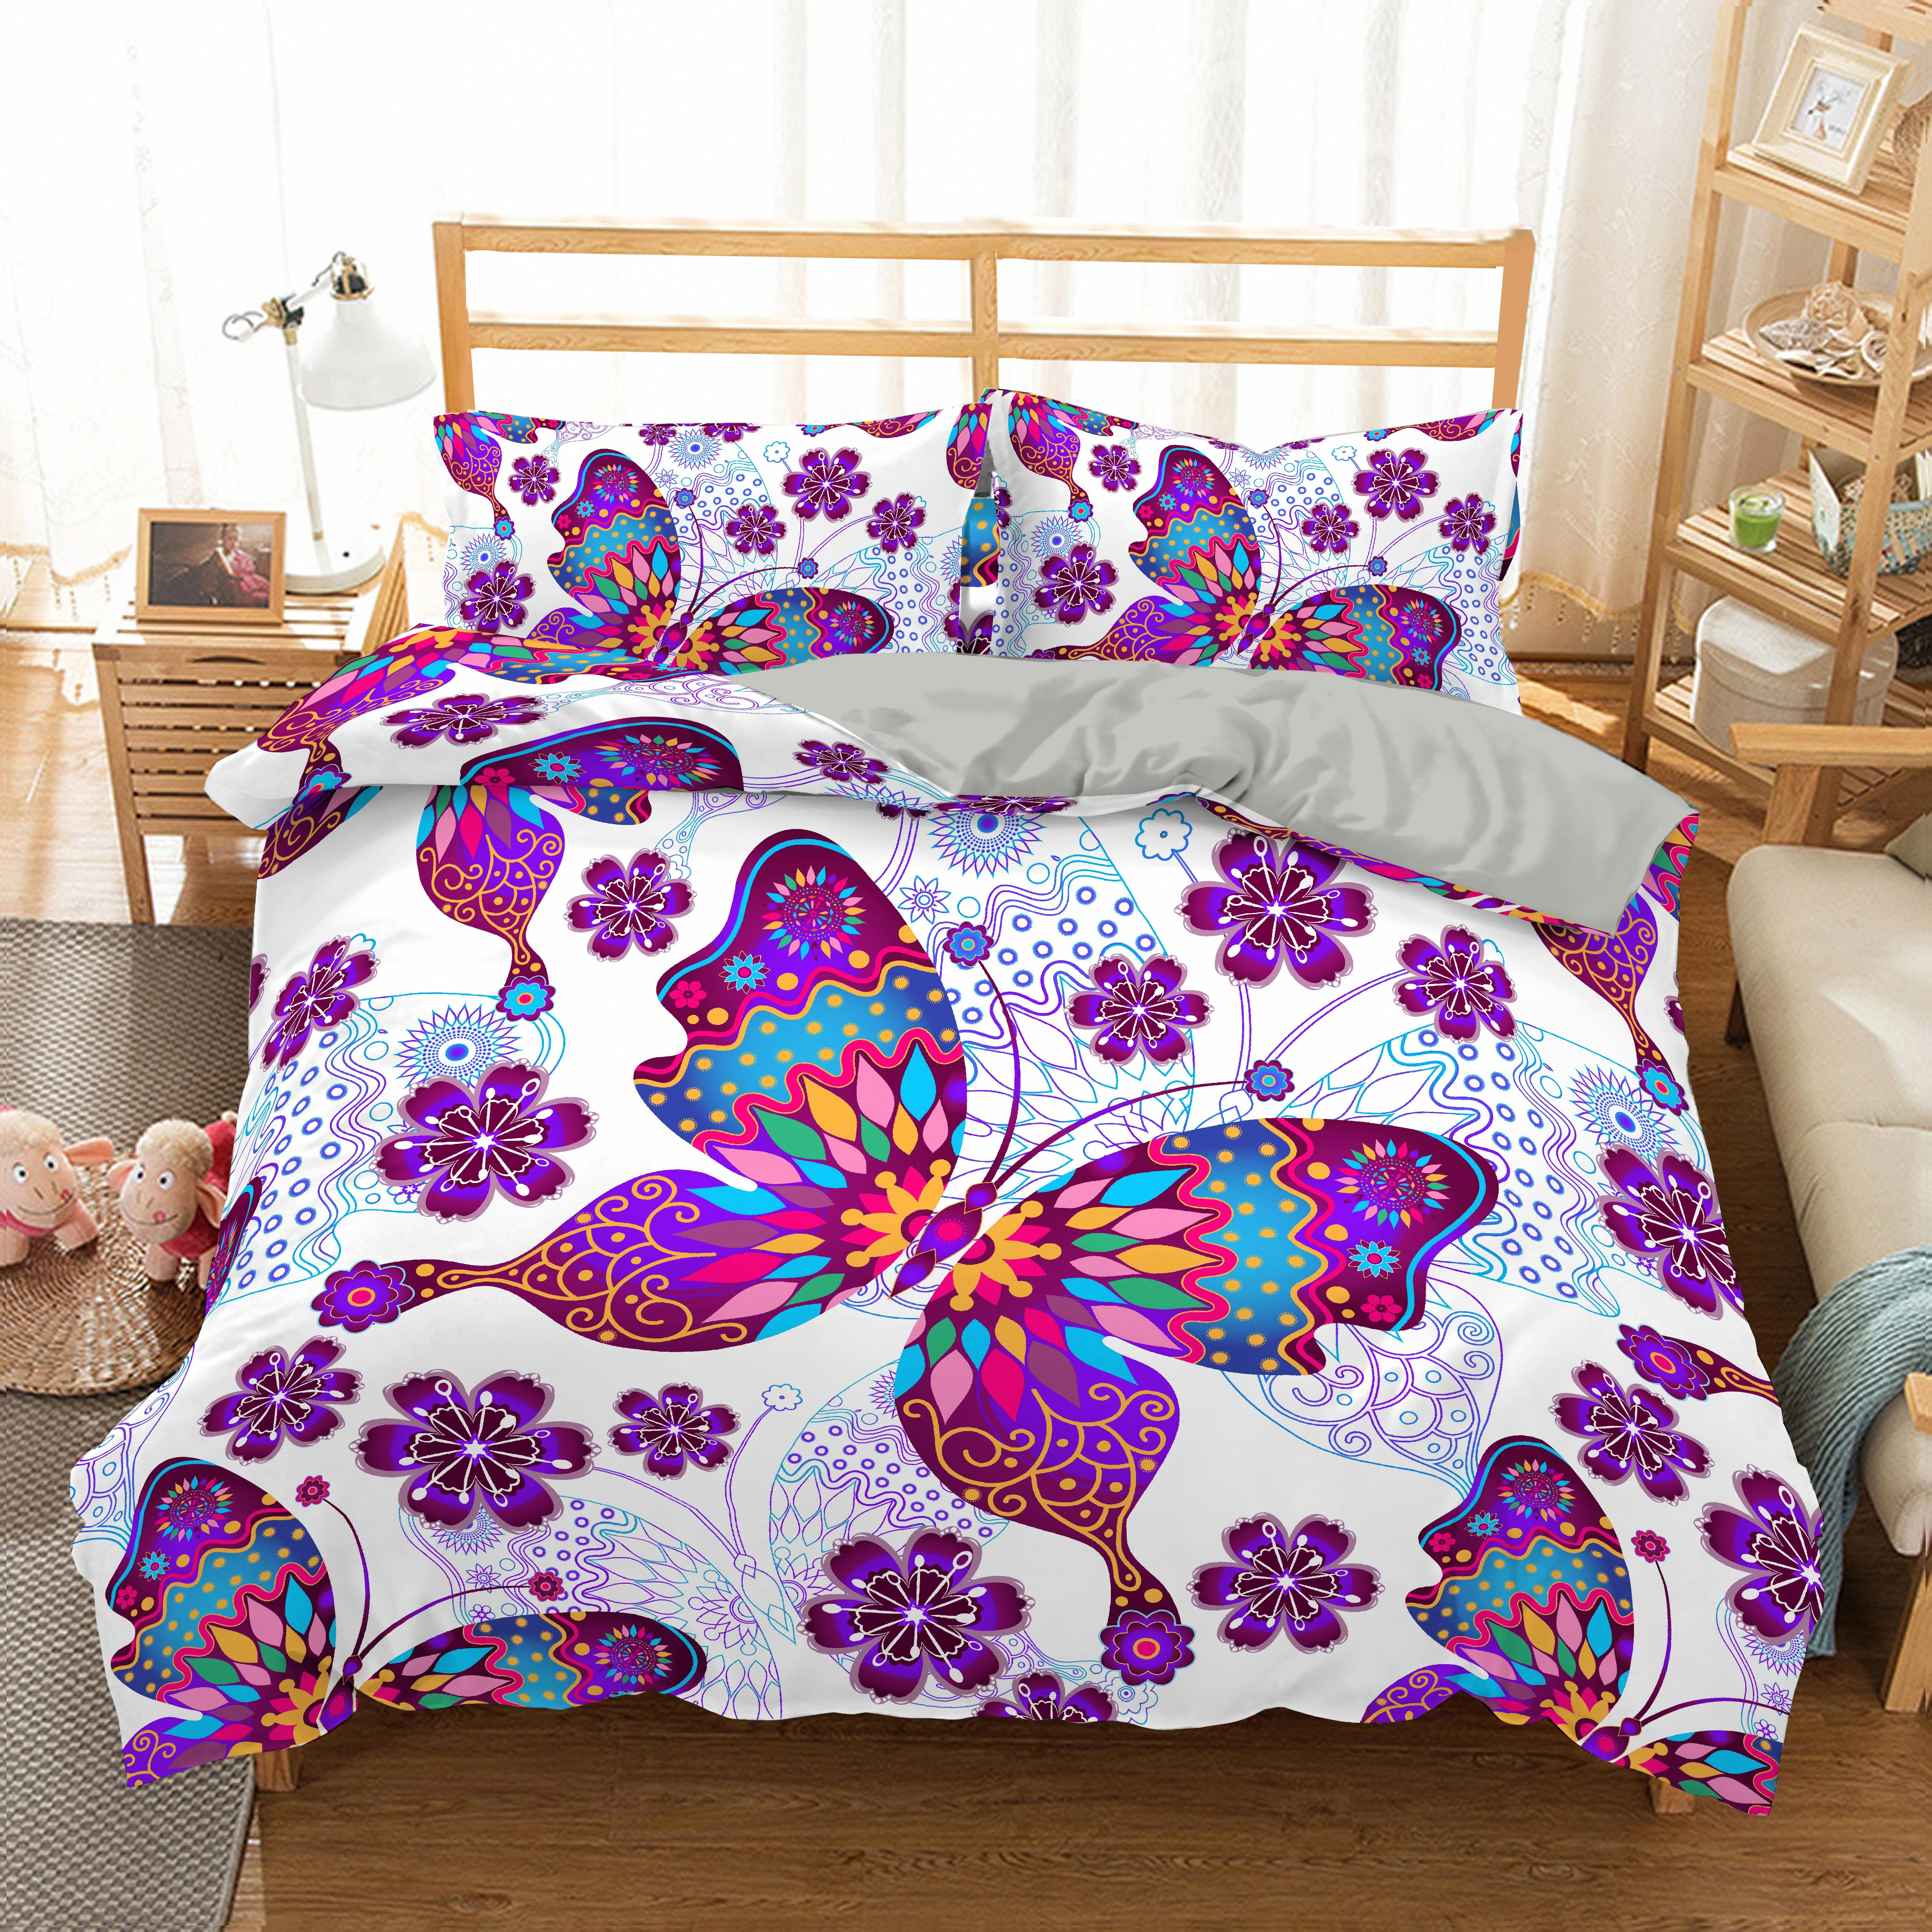 Tencel Cotton Butterfly Comforter Cover Sheet Sets with Pillowcases Imiee Beautiful Sunflower and Butterfly Duvet Cover Bedding Sets 3 Pieces Queen Size for Teen Kids Queen